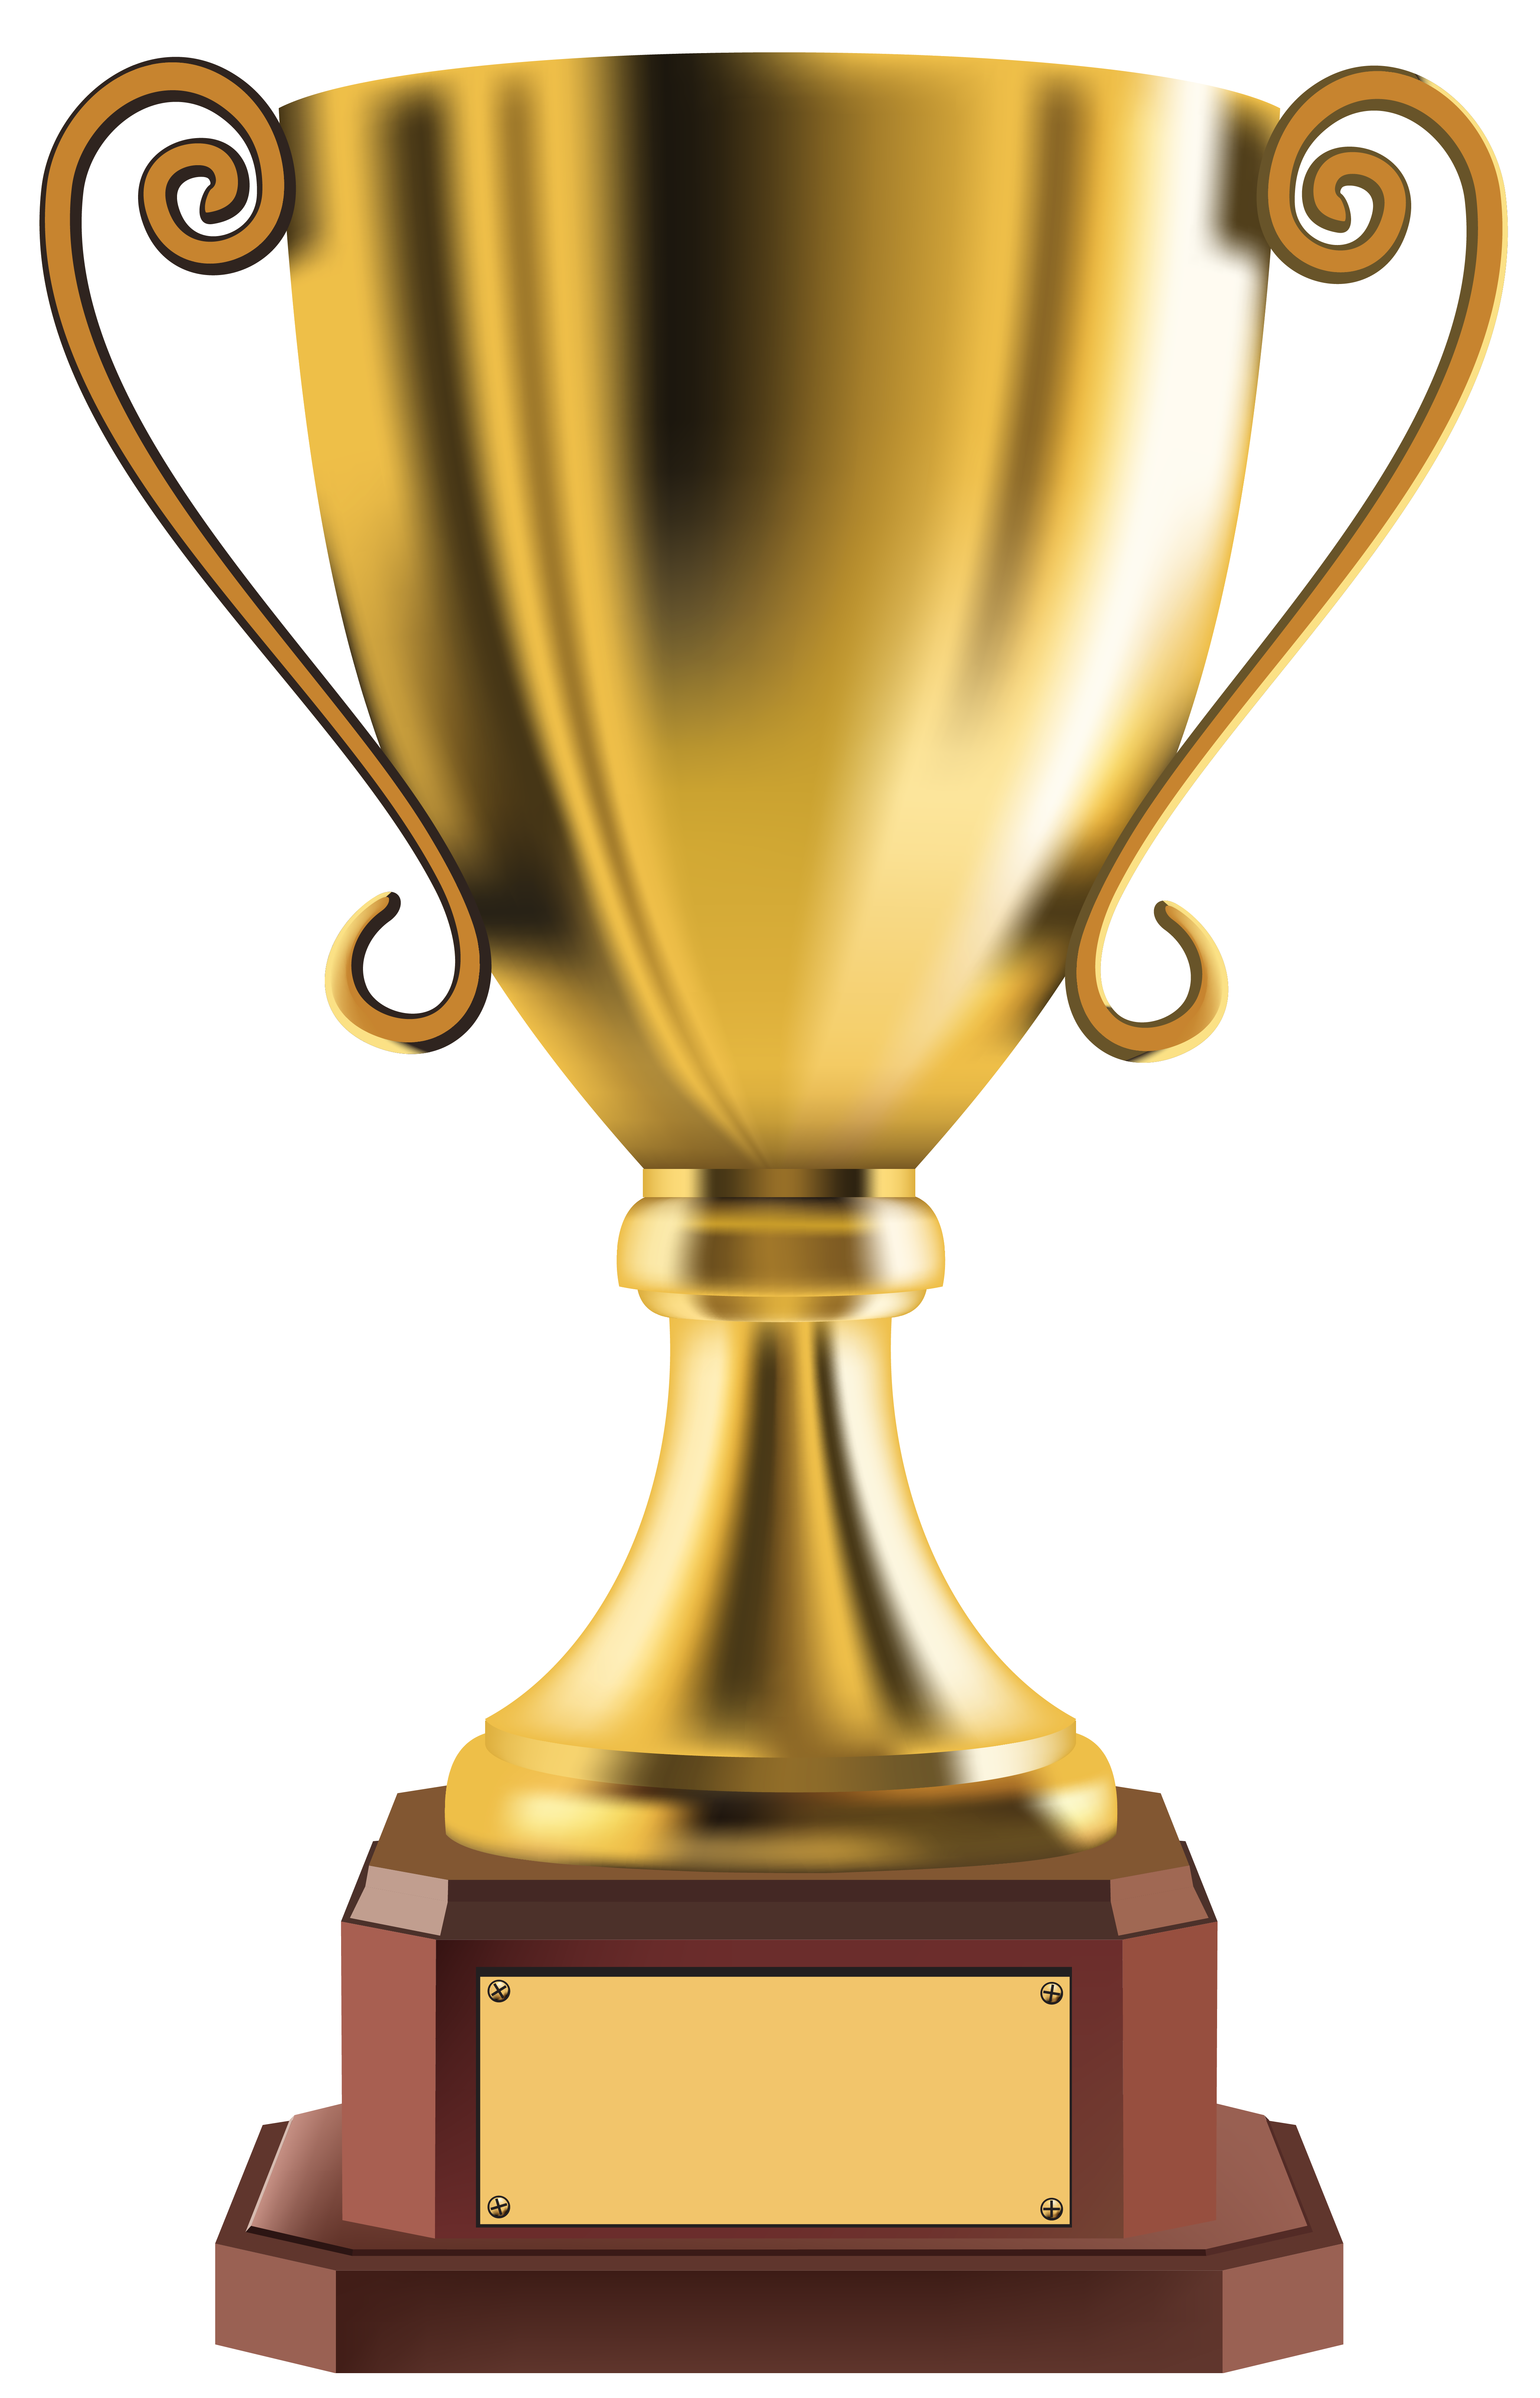 Golden cup PNG images free download, gold cup.